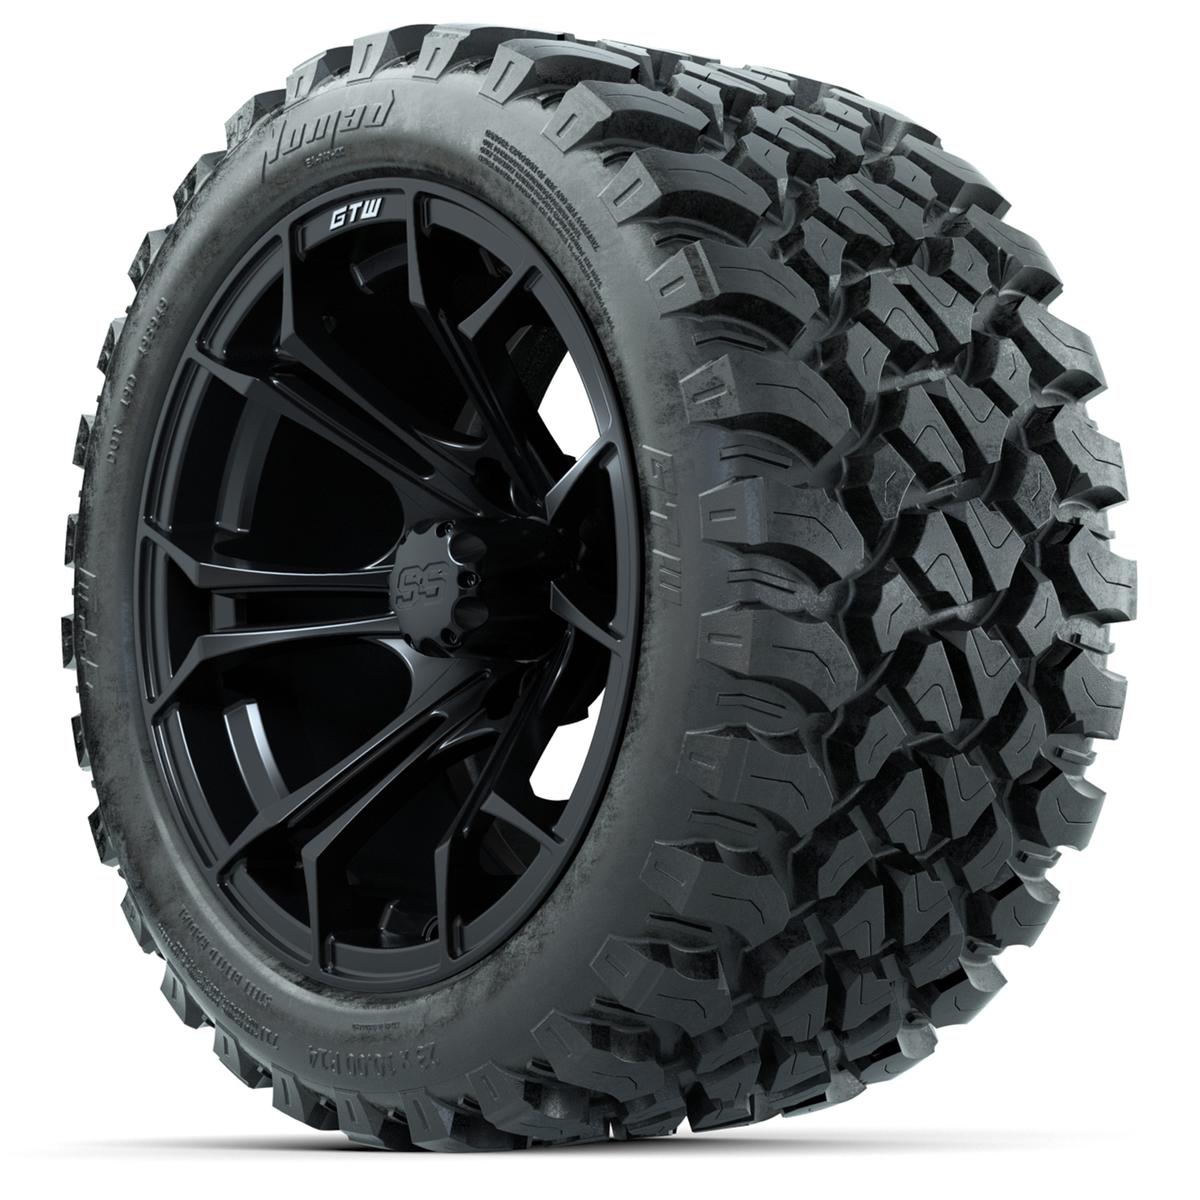 GTW Spyder Matte Black 14 in Wheels with 23x10-14 GTW Nomad All-Terrain Tires – Full Set